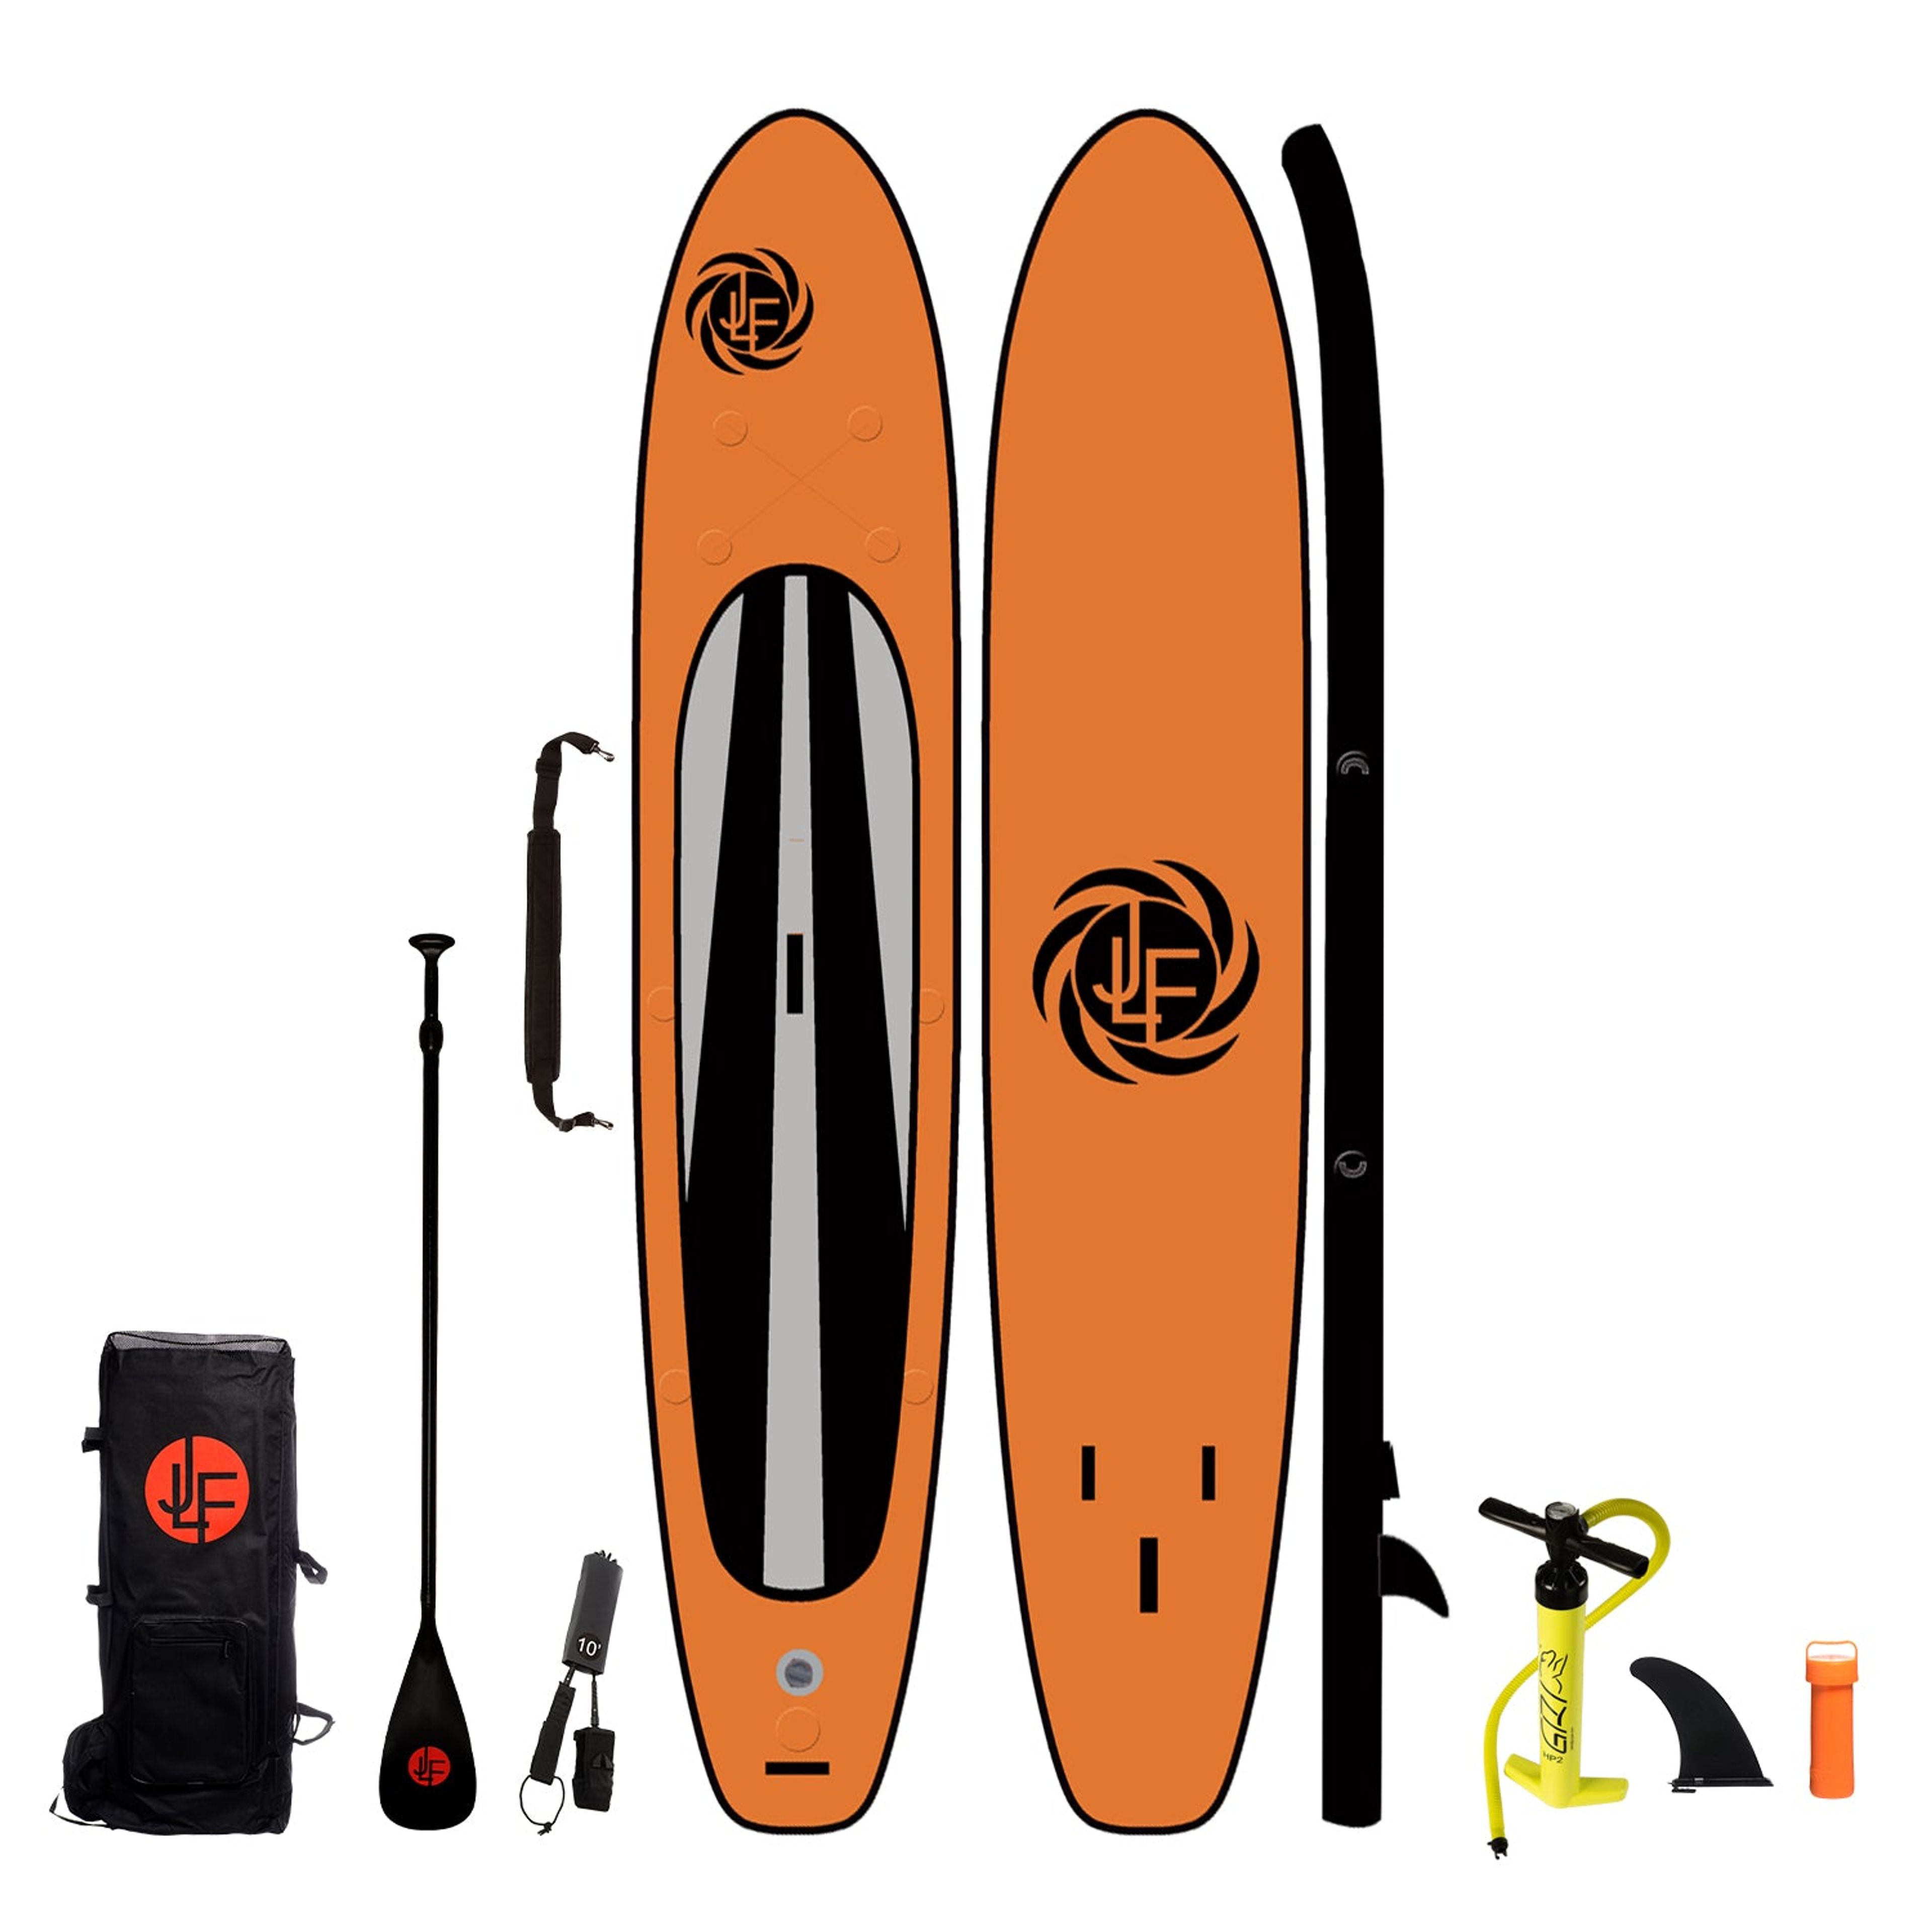 LIMITED EDITION:  JLF 15 Ft Inflatable Stand Up Paddle Board Set